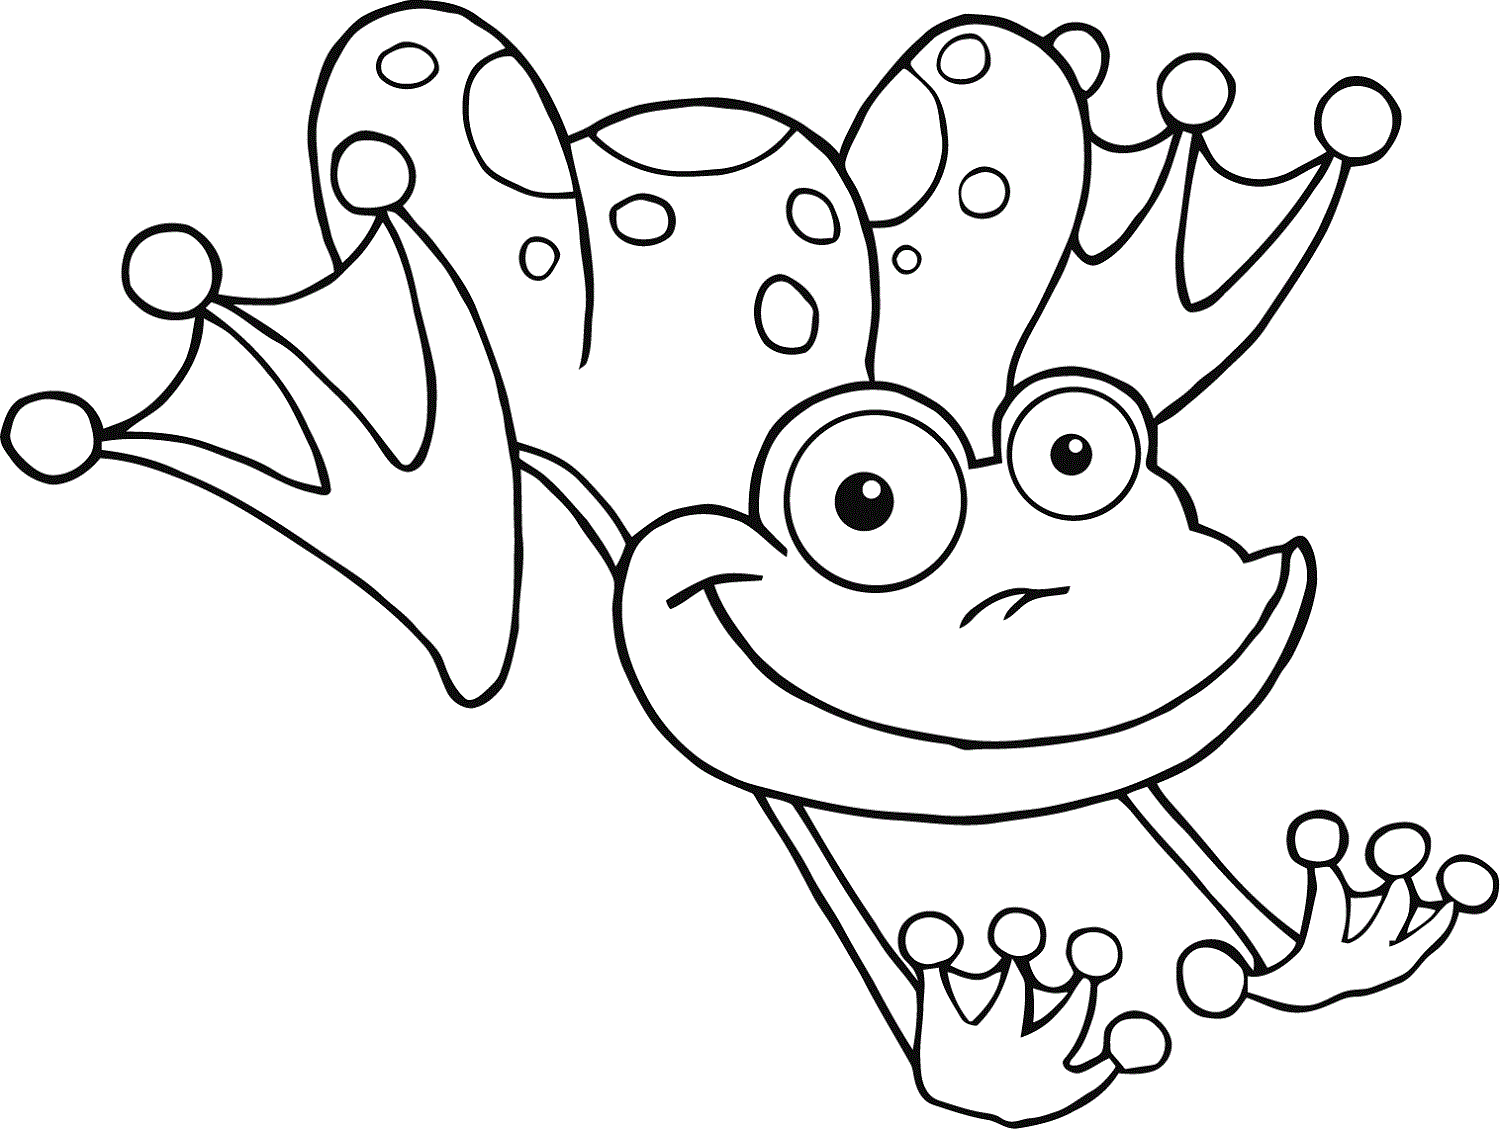 frog clipart free black and white - photo #34